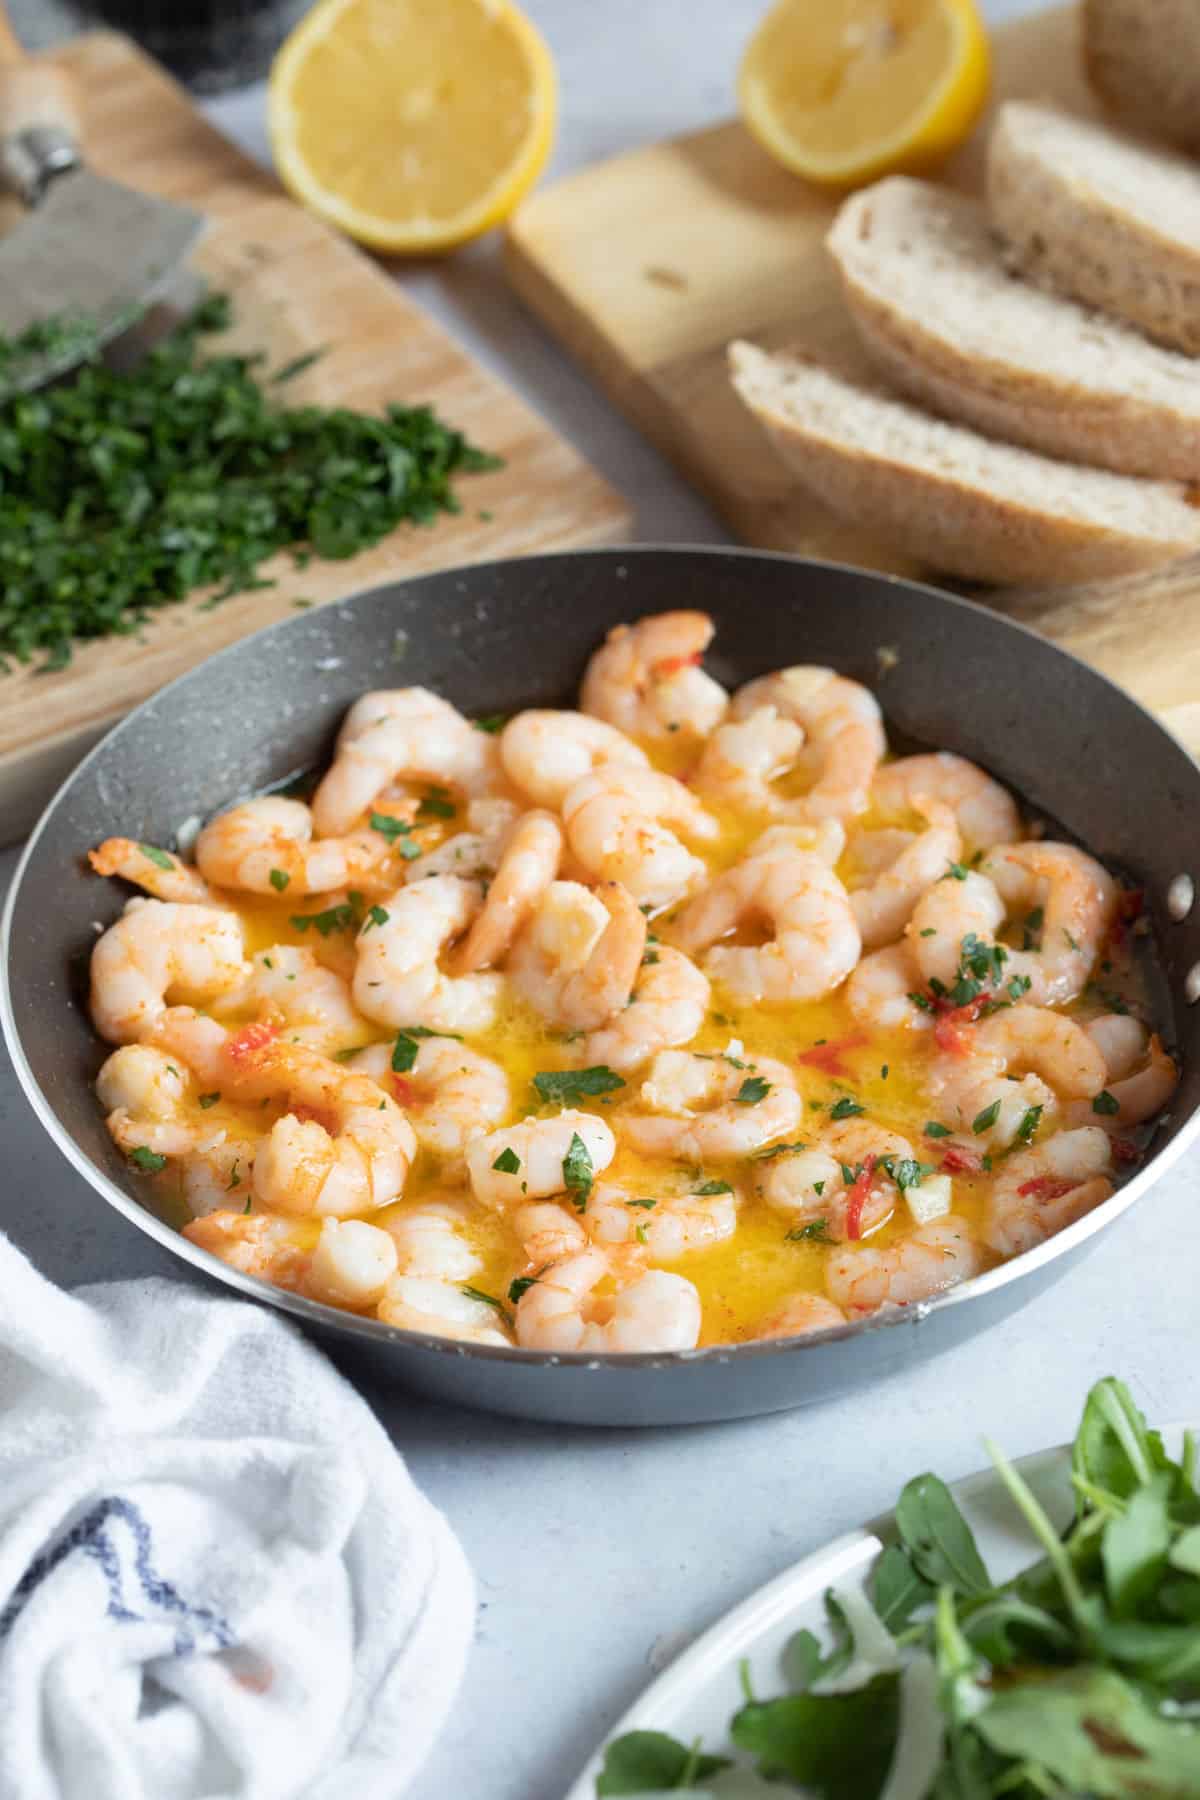 Gambas pil pil in a pan with salad and bread.